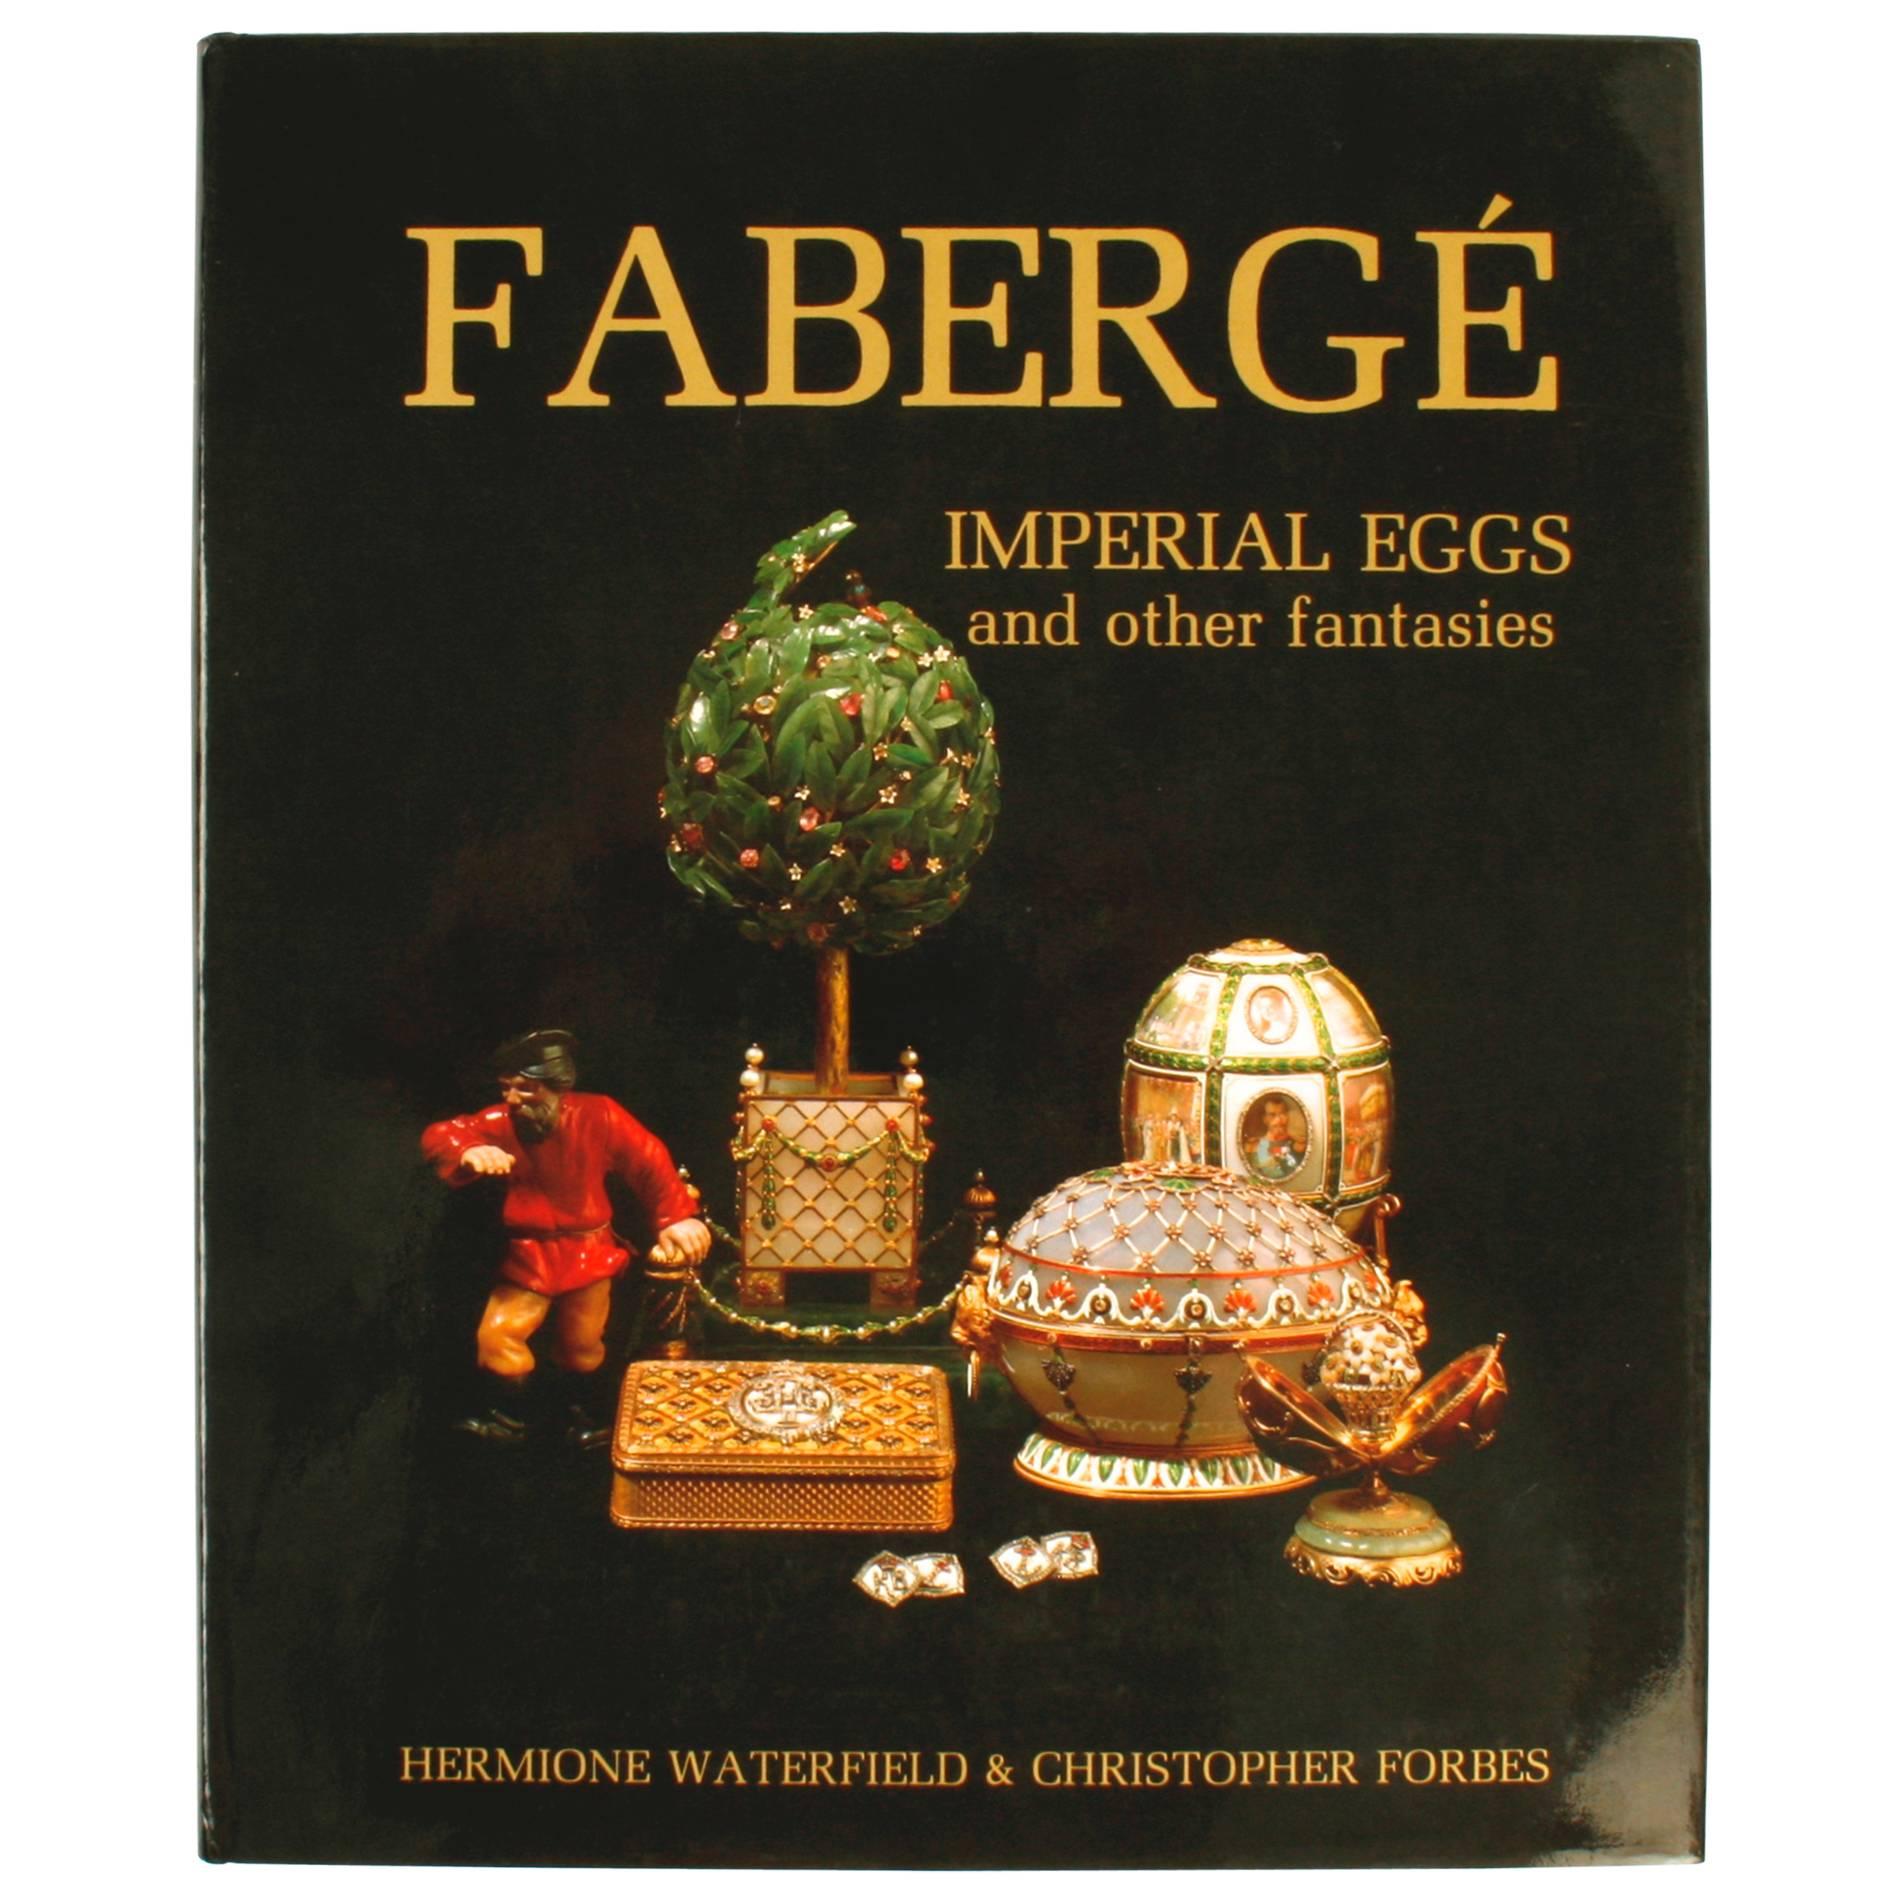 Fabergé, Imperial Eggs and Other Fantasies by H. Waterfield and C. Forbes